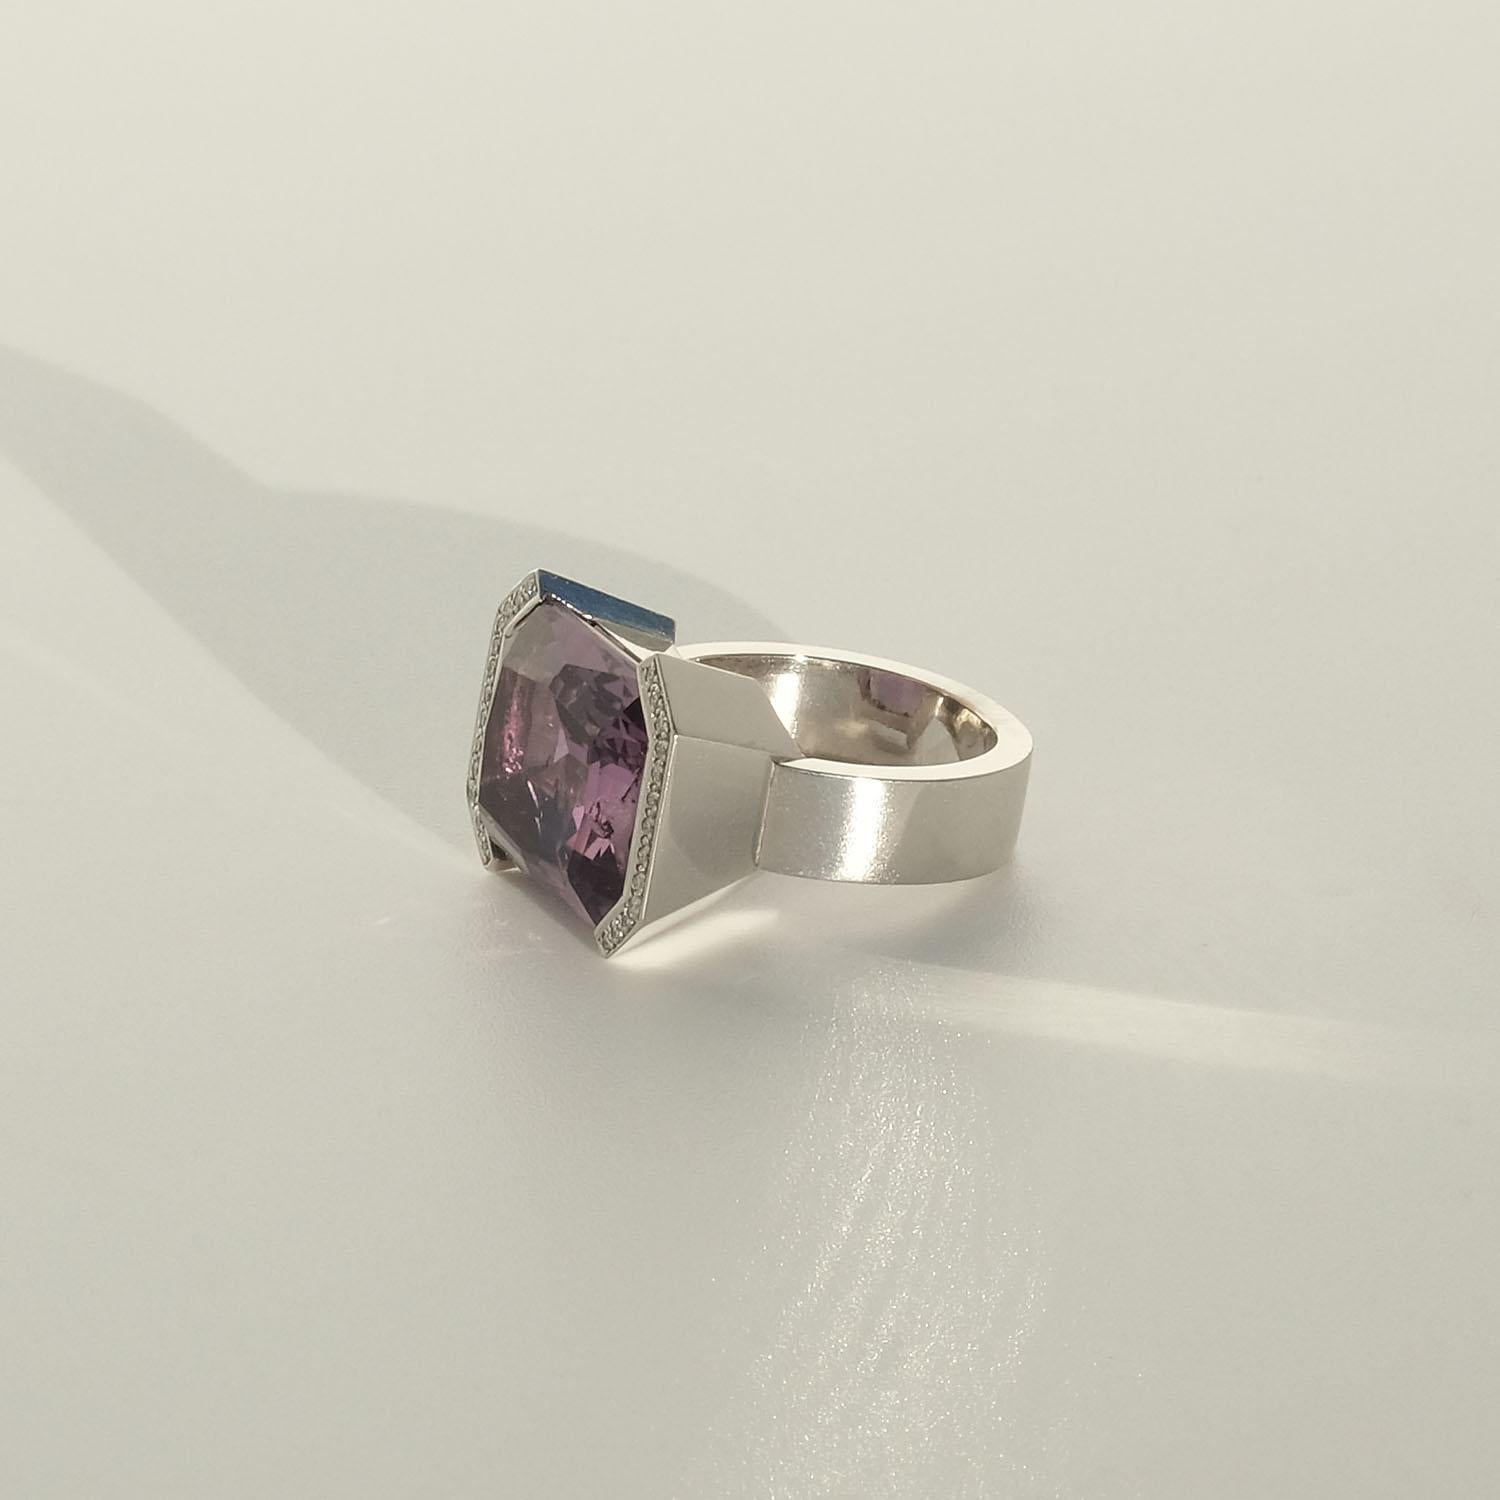 18k White Gold, Diamonds and Amethyst Ring by Swedish Lotta Torstensson In Good Condition For Sale In Stockholm, SE